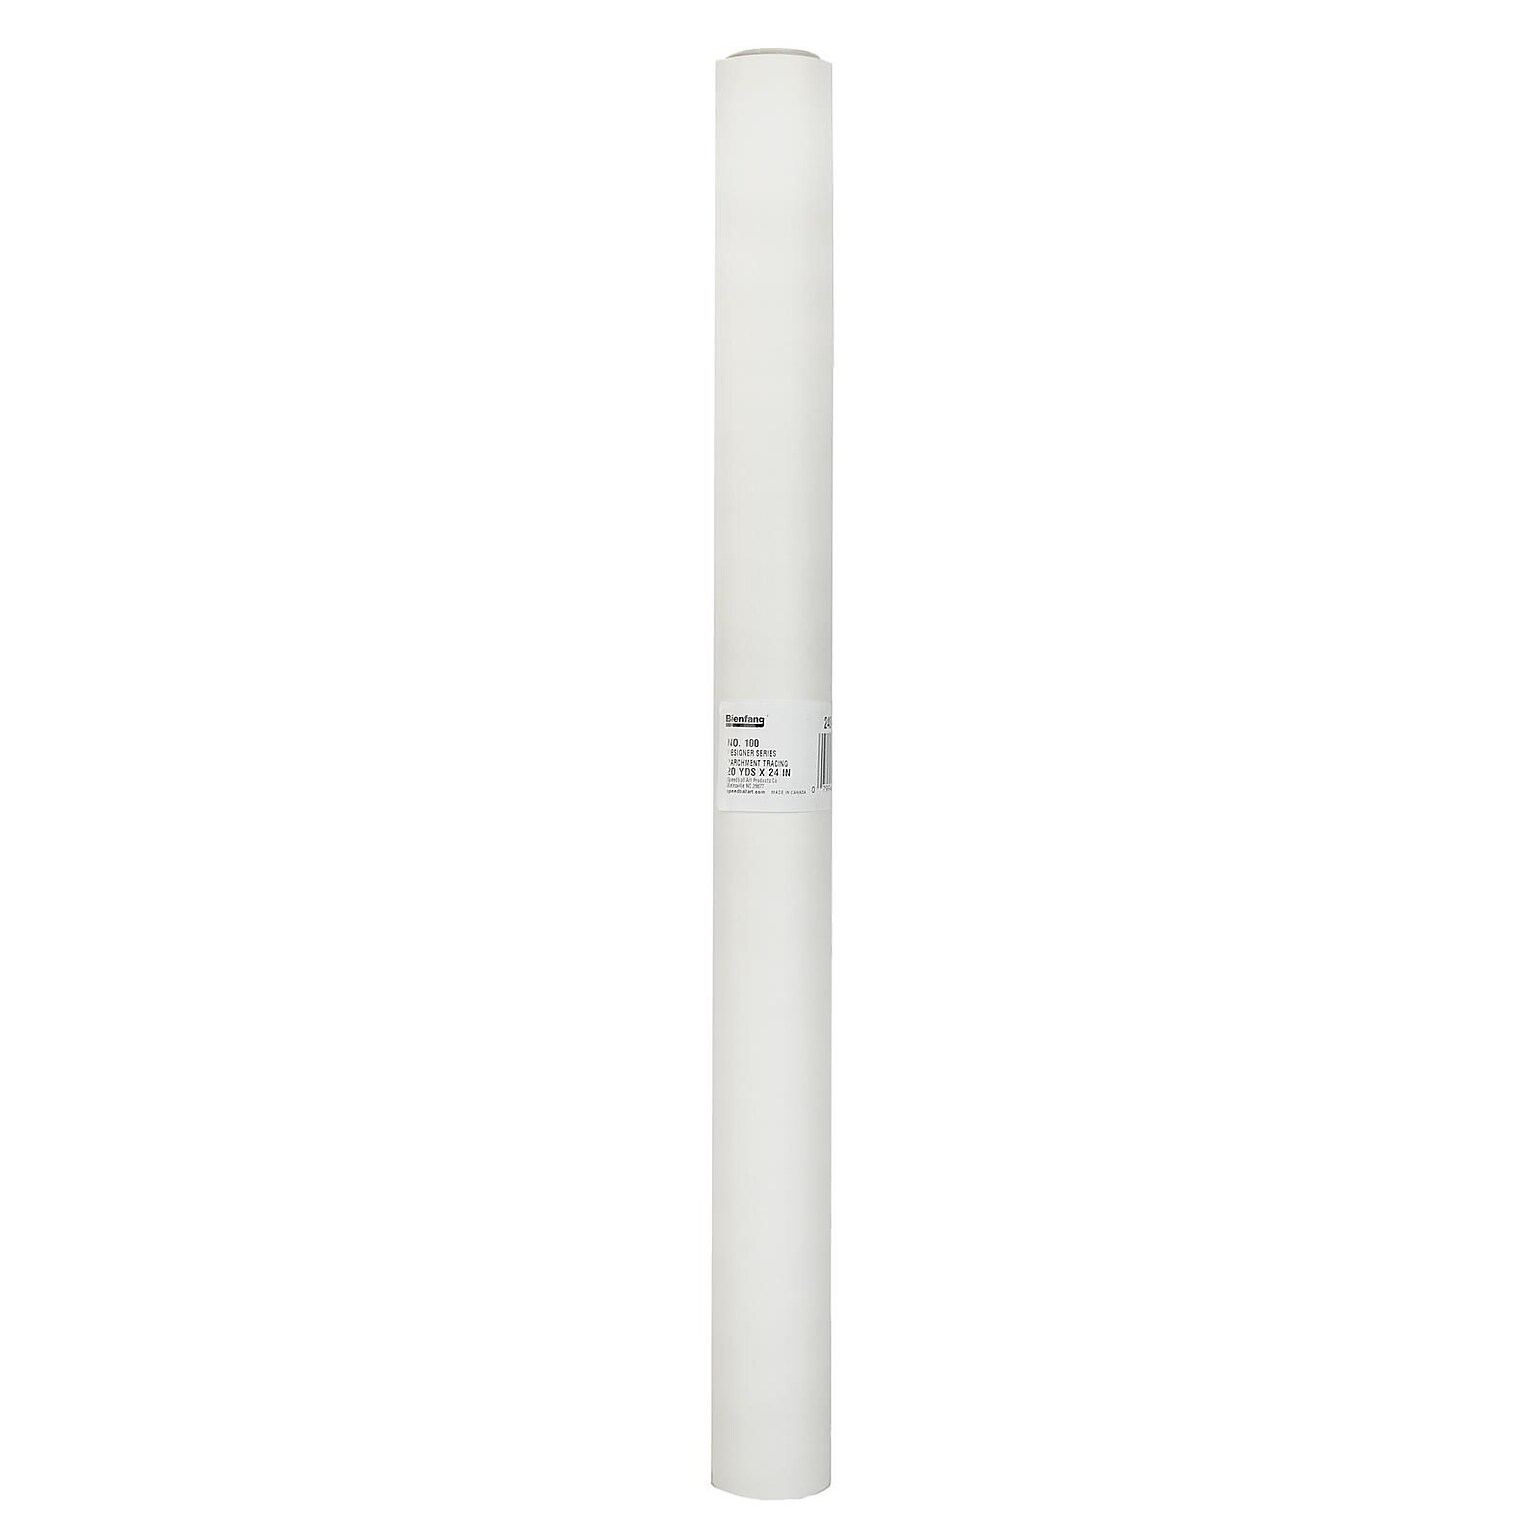 Bienfang Parchment 100 Tracing Paper 24 In. X 20 Yd. Roll (240323)